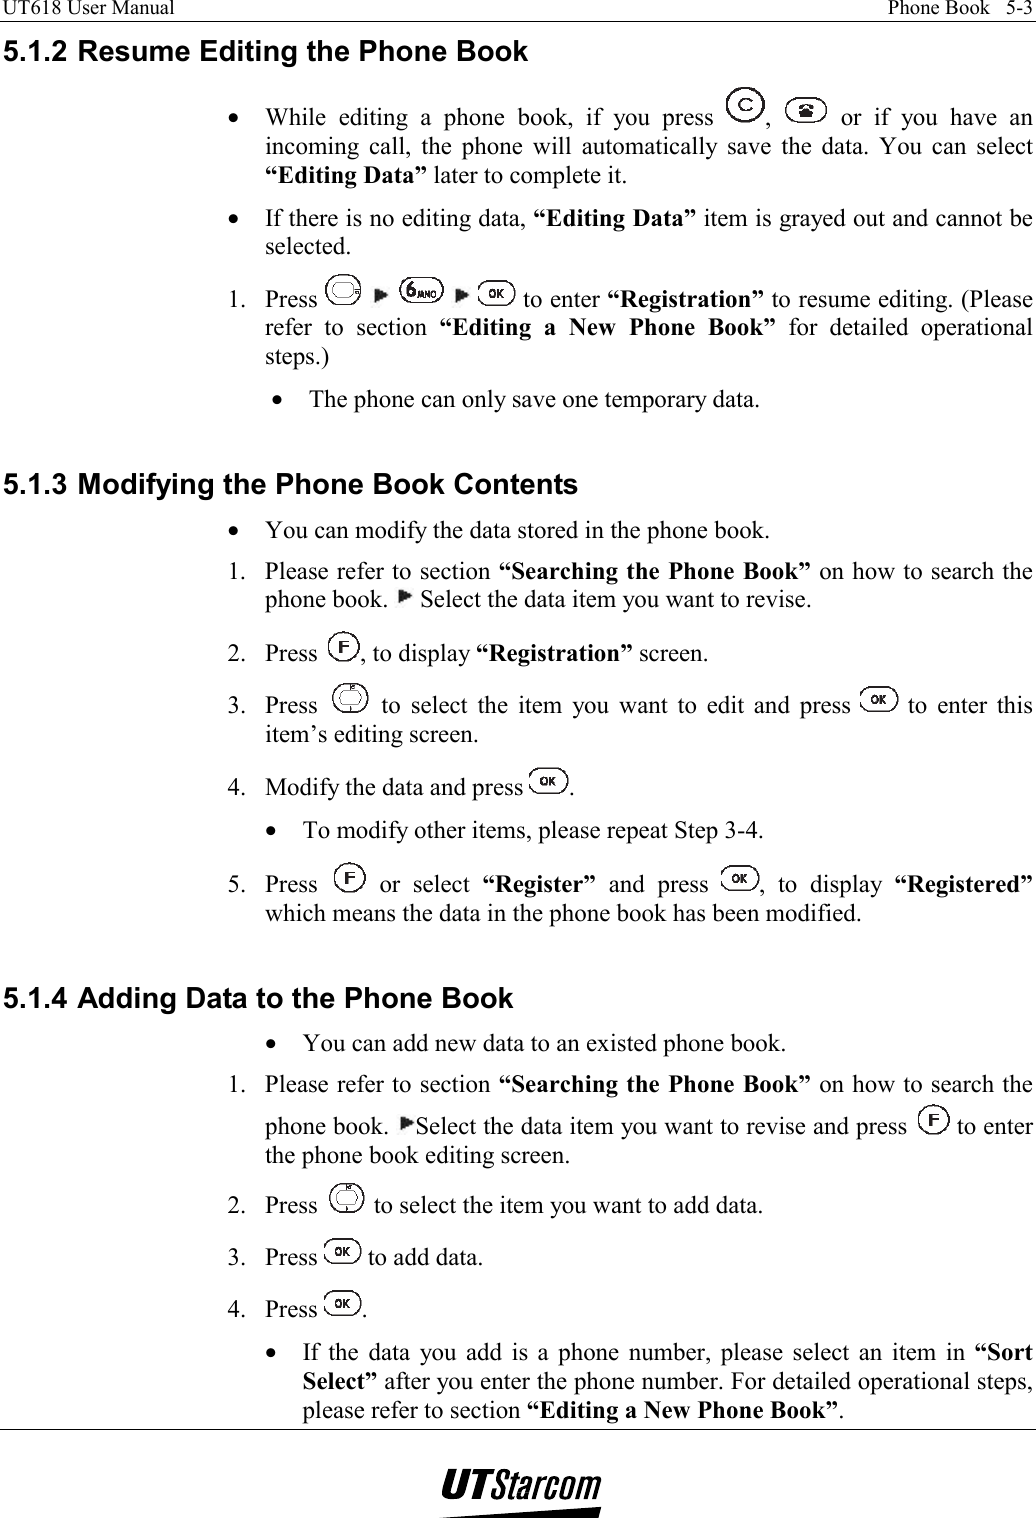 UT618 User Manual    Phone Book   5-3   5.1.2 Resume Editing the Phone Book •  While editing a phone book, if you press  ,   or if you have an incoming call, the phone will automatically save the data. You can select “Editing Data” later to complete it. •  If there is no editing data, “Editing Data” item is grayed out and cannot be selected. 1. Press           to enter “Registration” to resume editing. (Please refer to section “Editing a New Phone Book” for detailed operational steps.) •  The phone can only save one temporary data.  5.1.3 Modifying the Phone Book Contents •  You can modify the data stored in the phone book. 1.  Please refer to section “Searching the Phone Book” on how to search the phone book.   Select the data item you want to revise. 2. Press  , to display “Registration” screen. 3. Press   to select the item you want to edit and press   to enter this item’s editing screen. 4.  Modify the data and press  . •  To modify other items, please repeat Step 3-4. 5. Press   or select “Register” and press  , to display “Registered” which means the data in the phone book has been modified.  5.1.4 Adding Data to the Phone Book •  You can add new data to an existed phone book. 1.  Please refer to section “Searching the Phone Book” on how to search the phone book.  Select the data item you want to revise and press   to enter the phone book editing screen. 2. Press   to select the item you want to add data. 3. Press   to add data. 4. Press  . •  If the data you add is a phone number, please select an item in “Sort Select” after you enter the phone number. For detailed operational steps, please refer to section “Editing a New Phone Book”. 